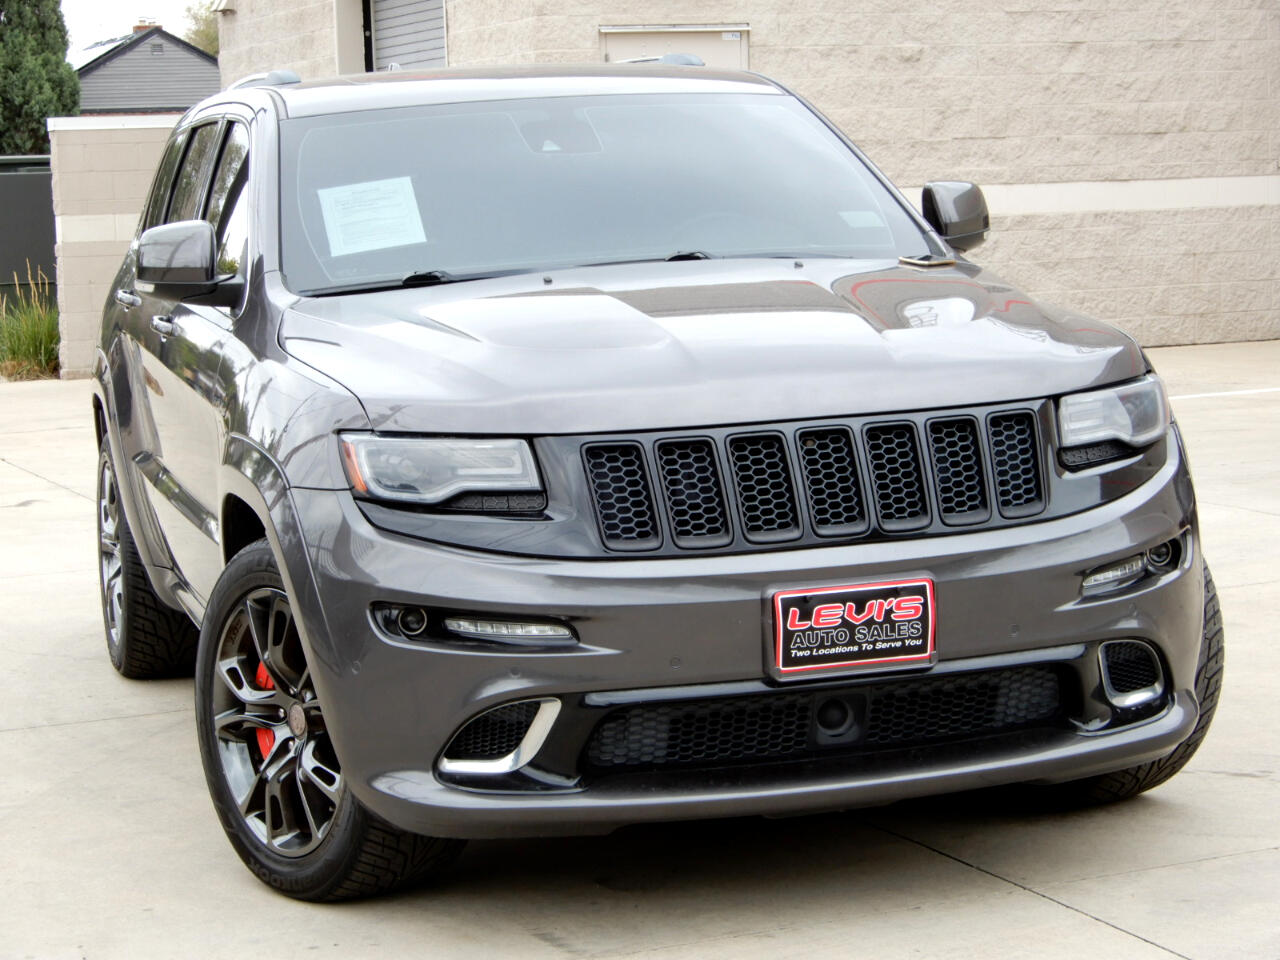 Used 2014 Jeep Grand Cherokee 4WD 4dr SRT8 for Sale in